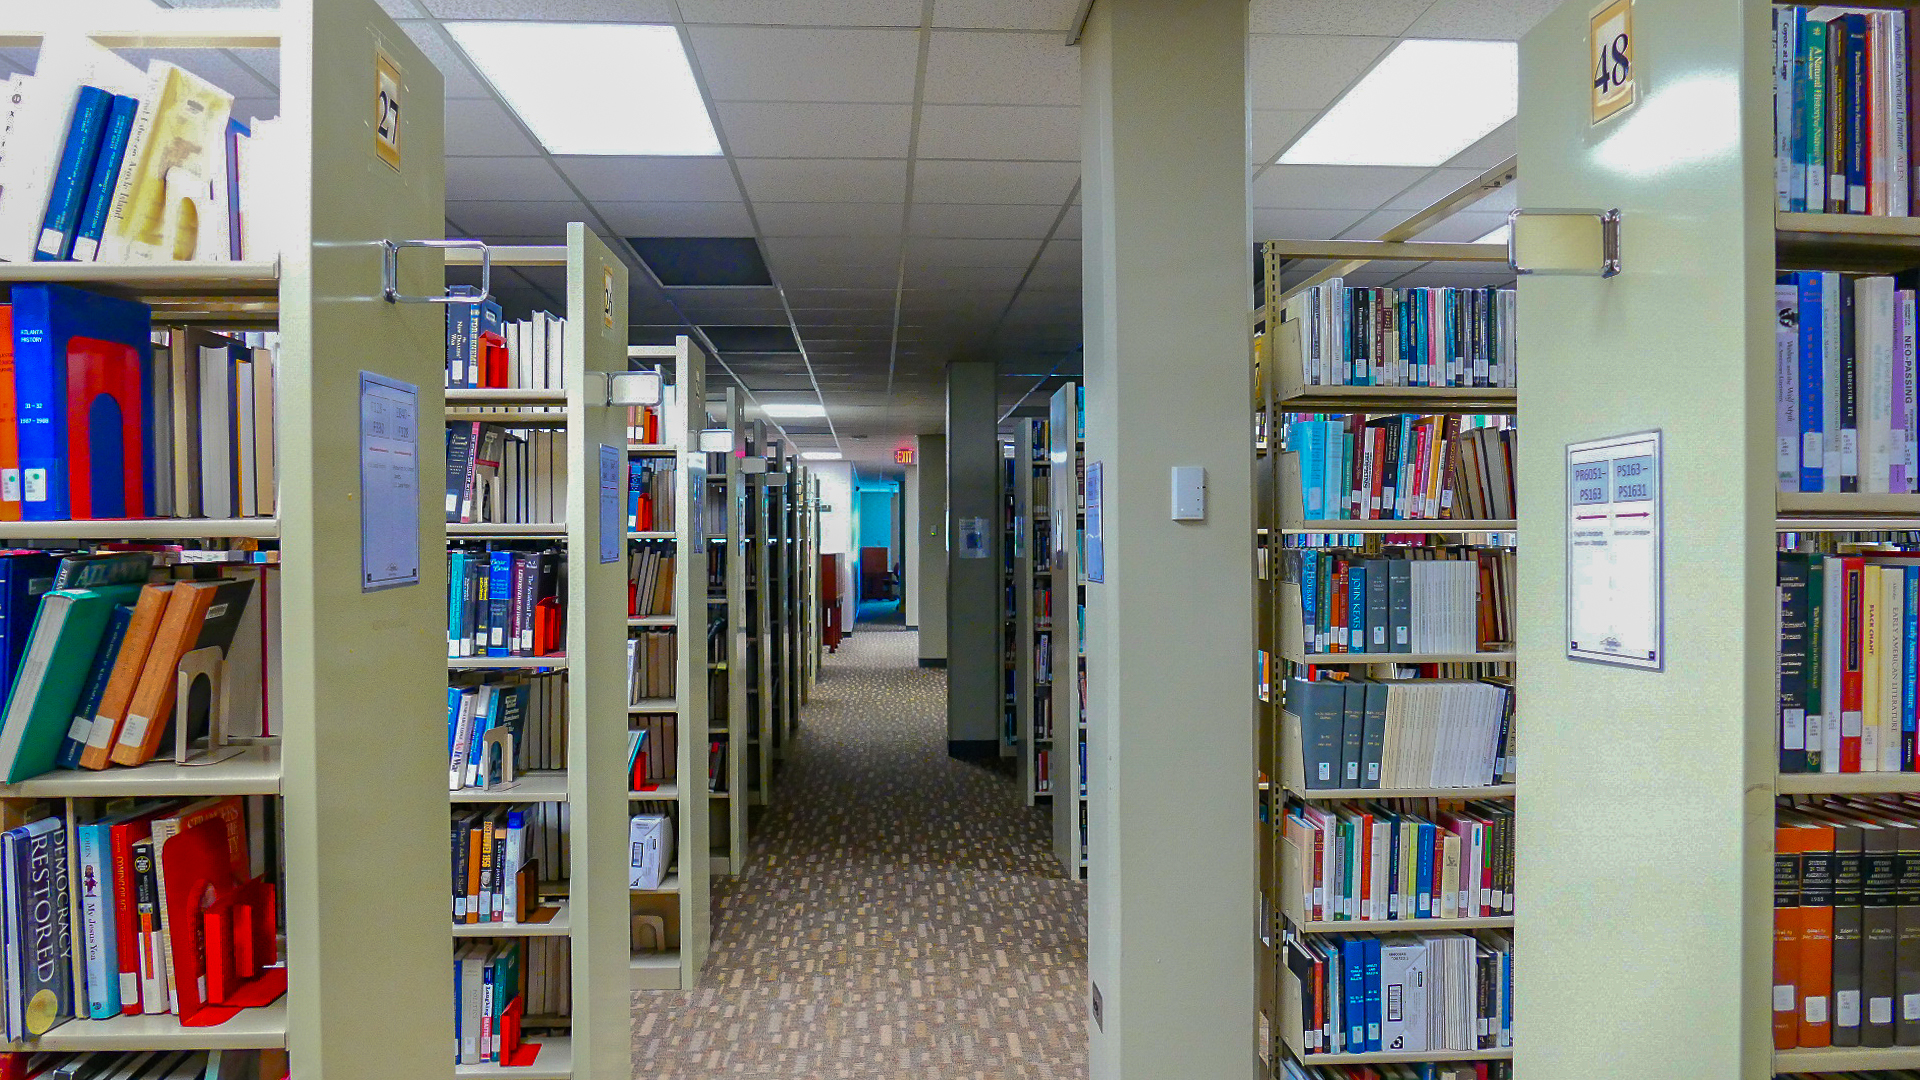 KSU library stays open amid COVID-19 concerns, provides employees with protective gear